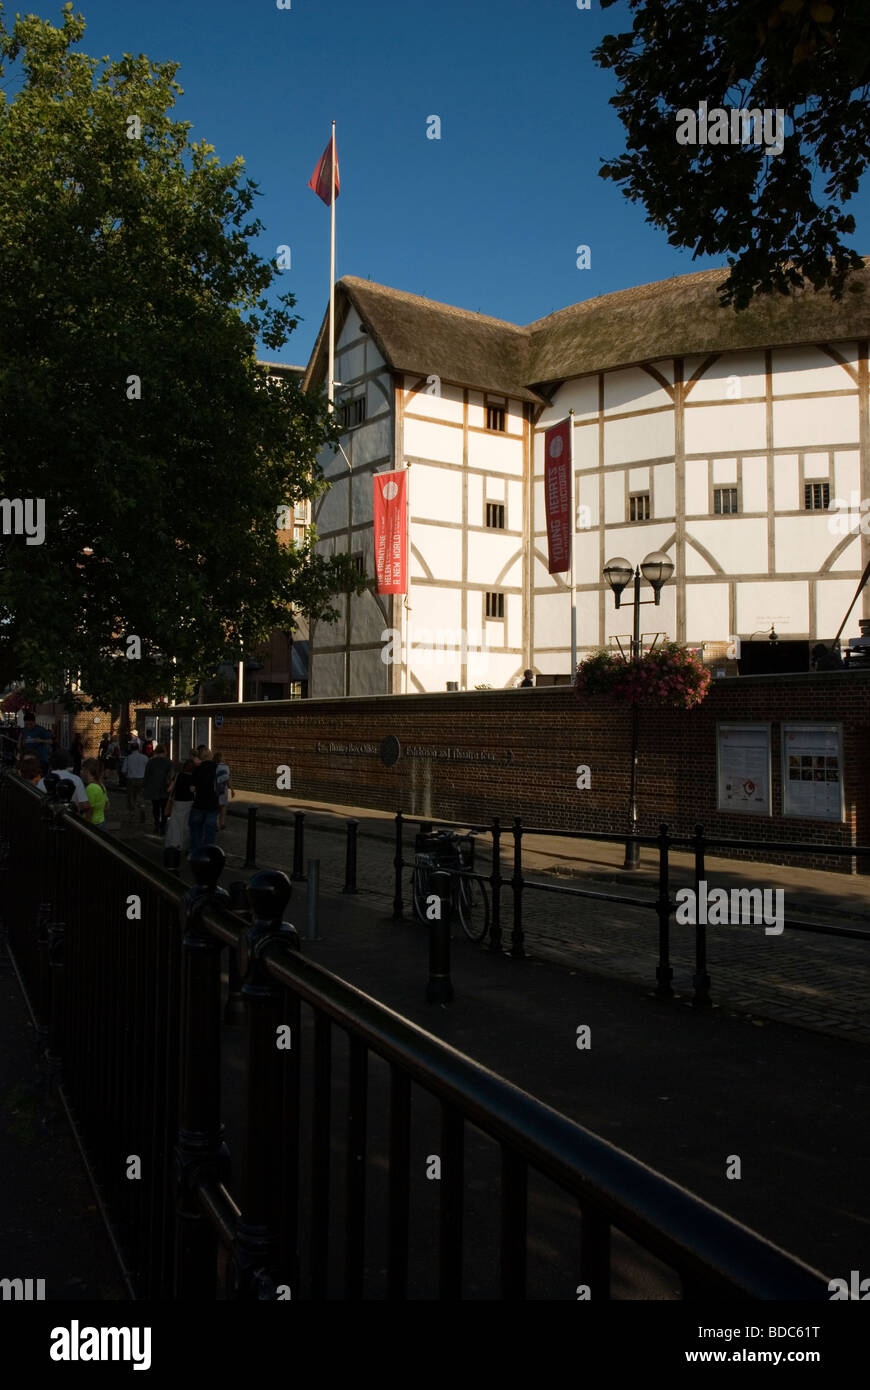 Shakespeare's Globe Theatre in Southwark on the south bank of the River Thames, London England UK Stock Photo